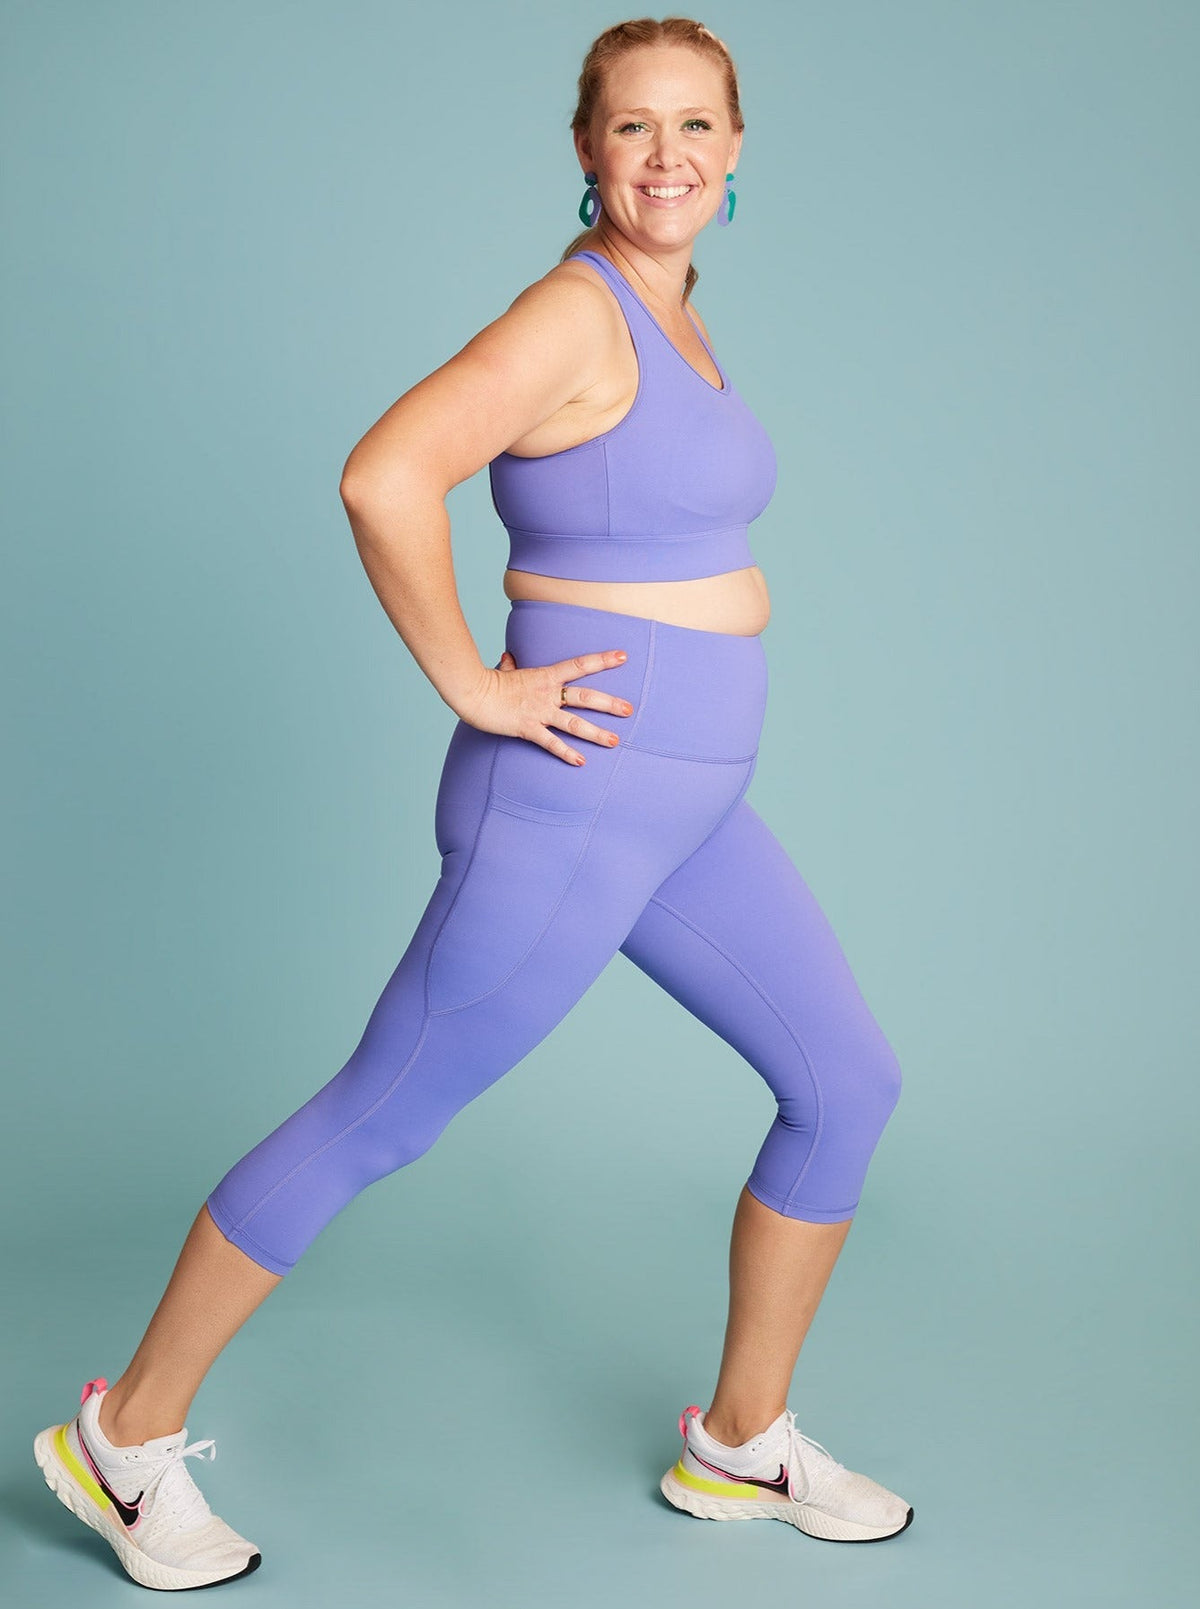 Periwinkle Purple Everyday Cropped Legging - 3/4 length - matching purple crop top and leggings